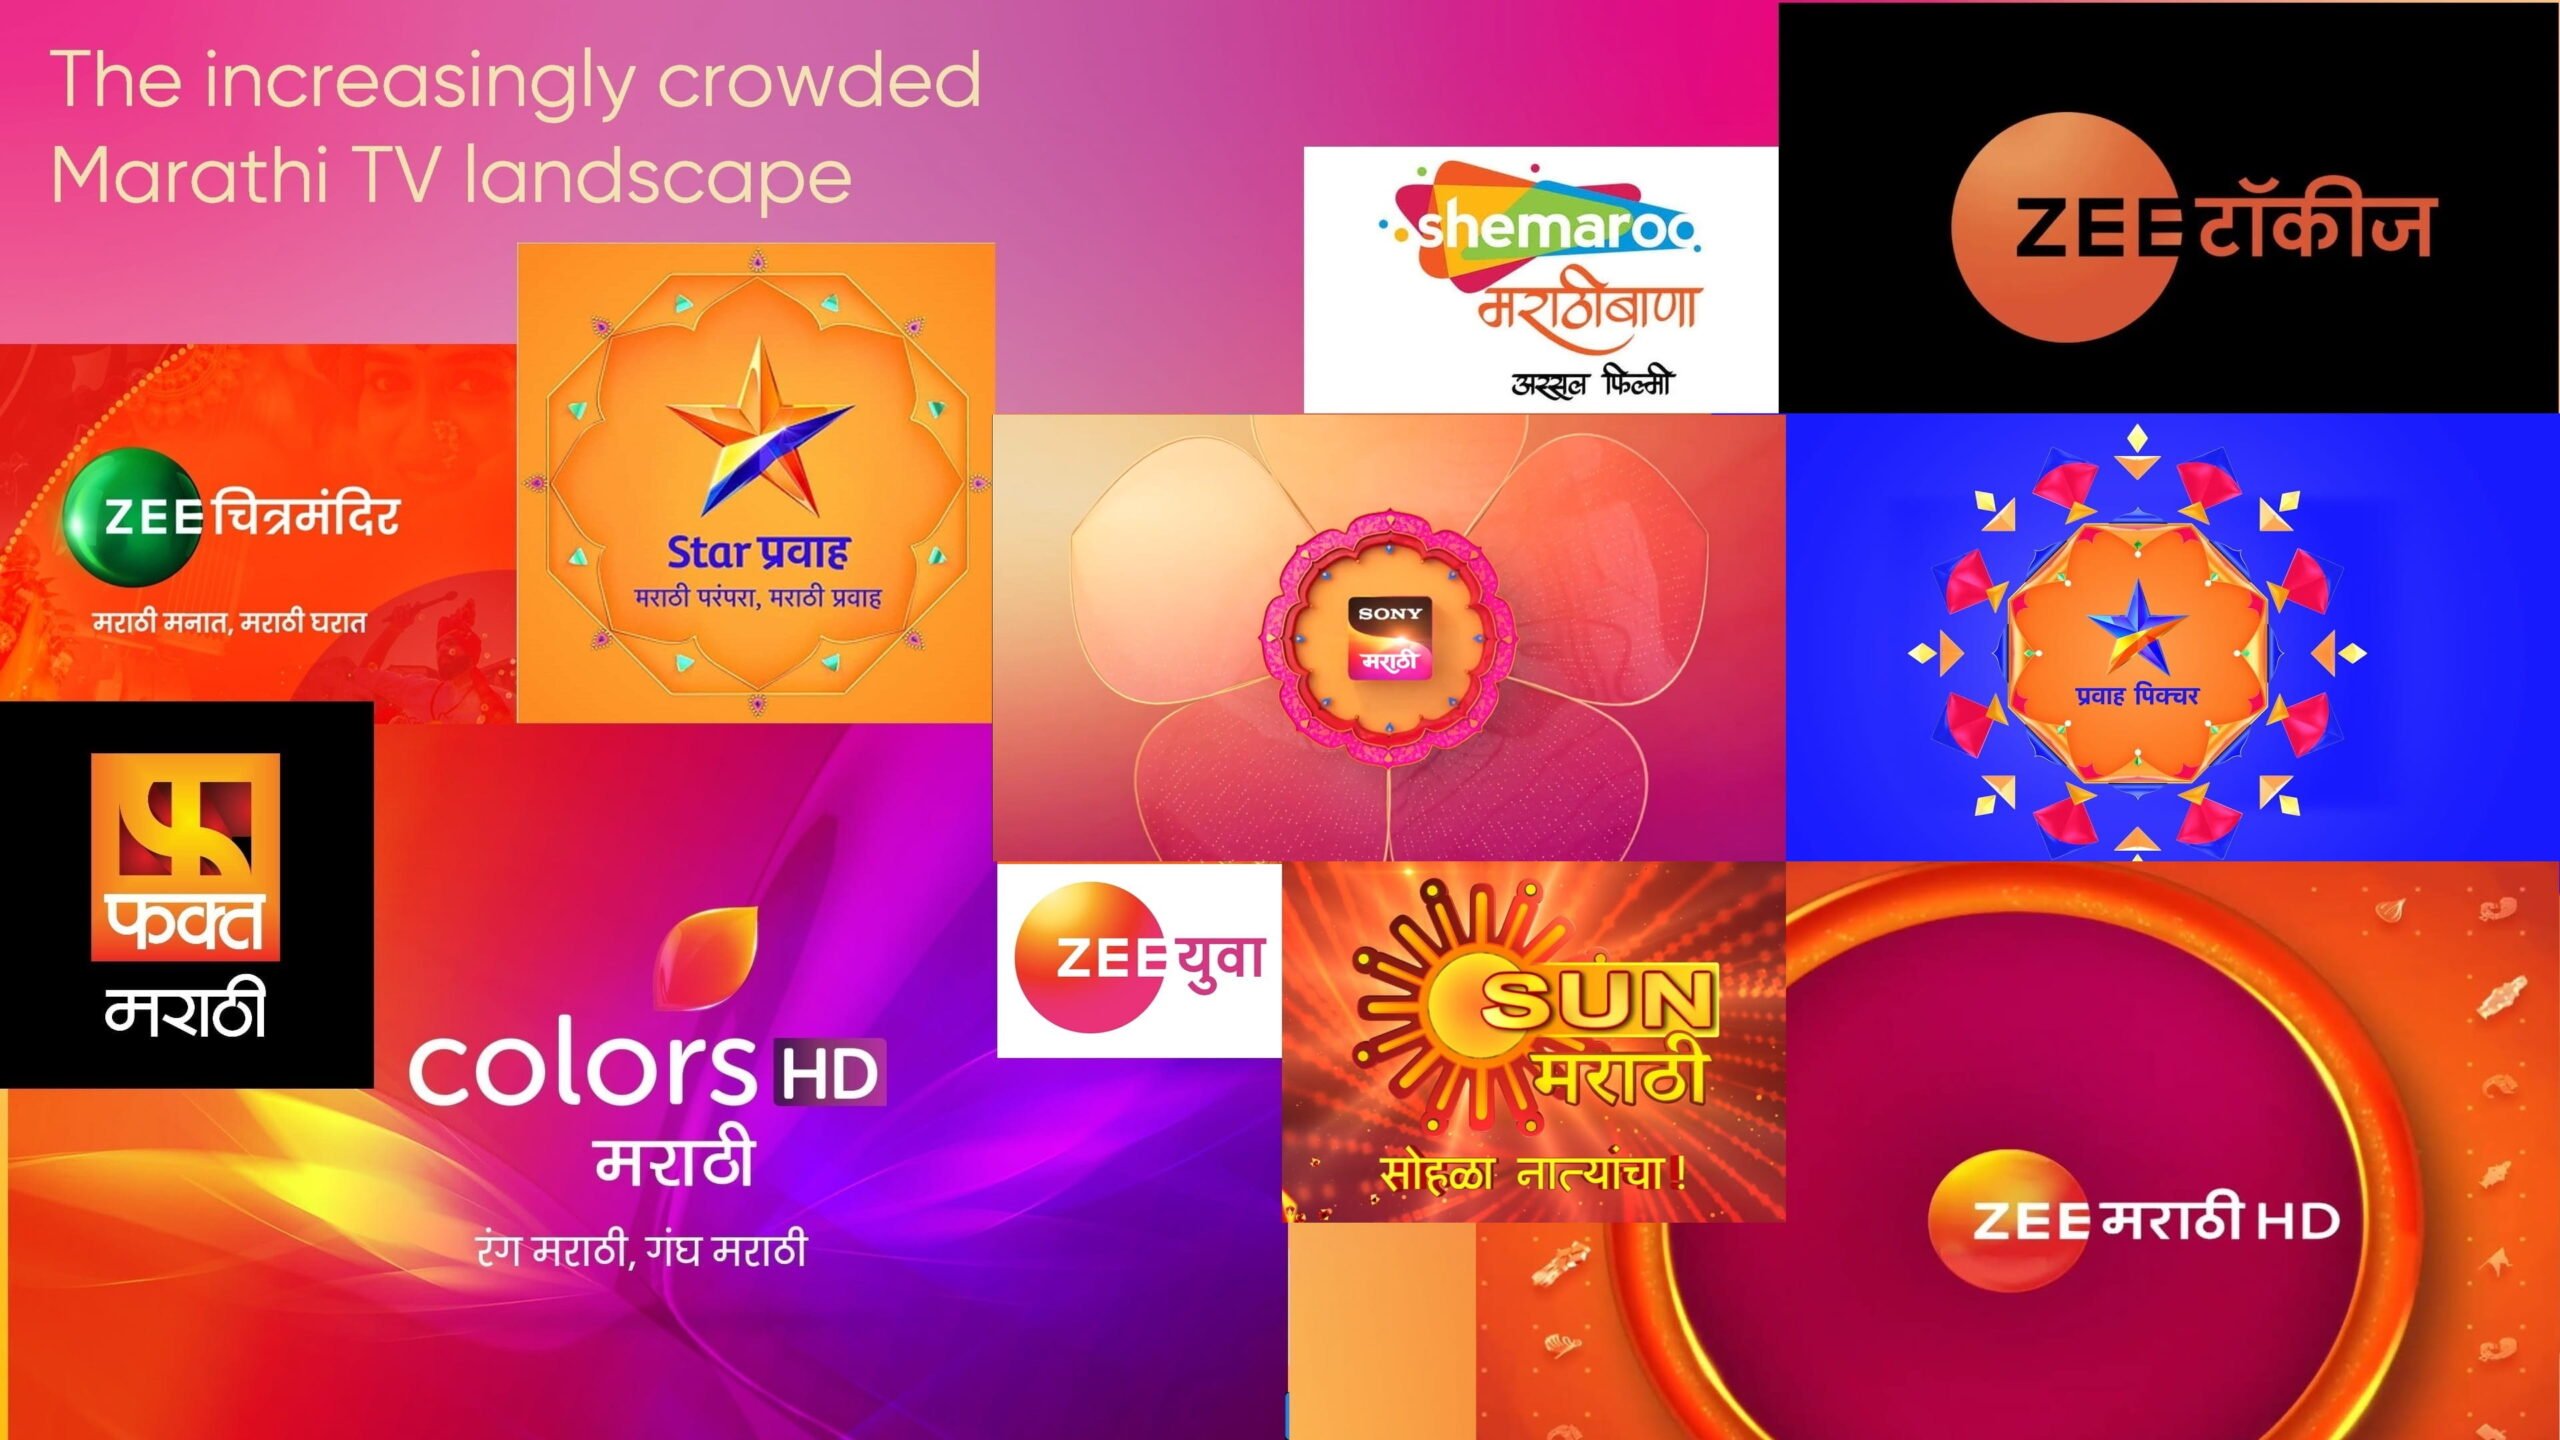 Marathi TV Channels Collage 2023 scaled